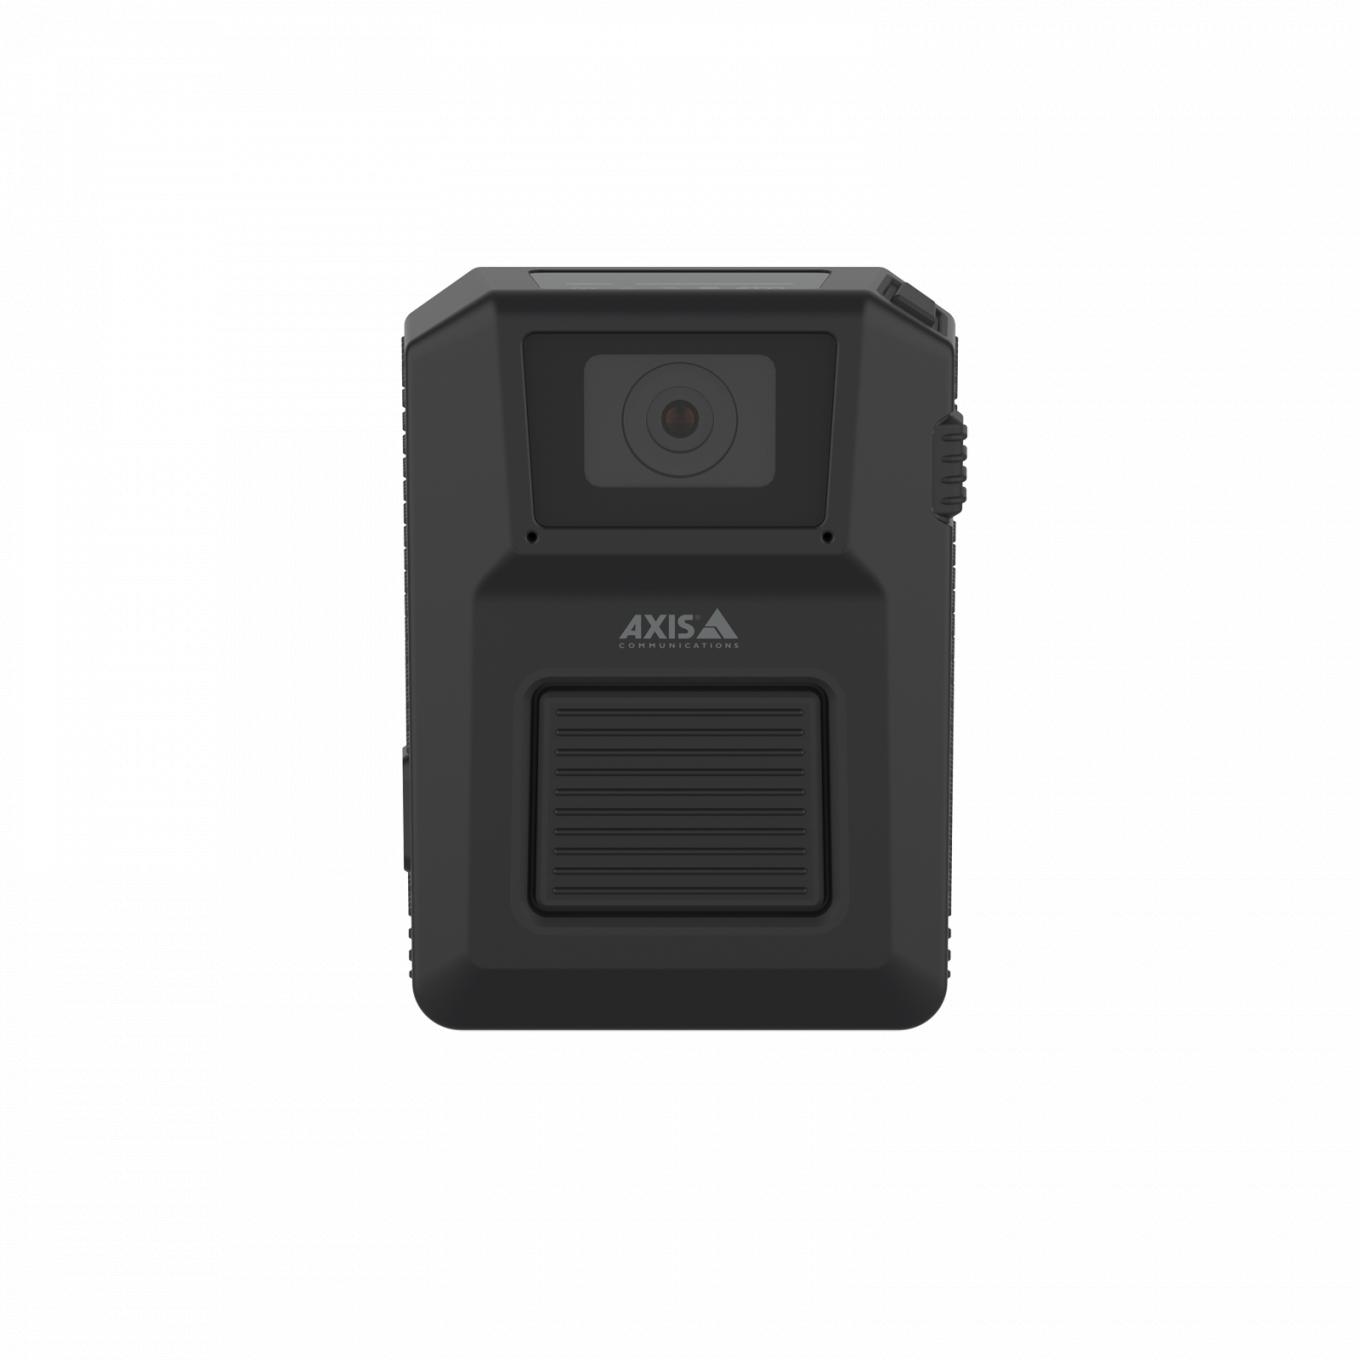 AXIS W101 Body Worn Camera in black color, viewed from its front